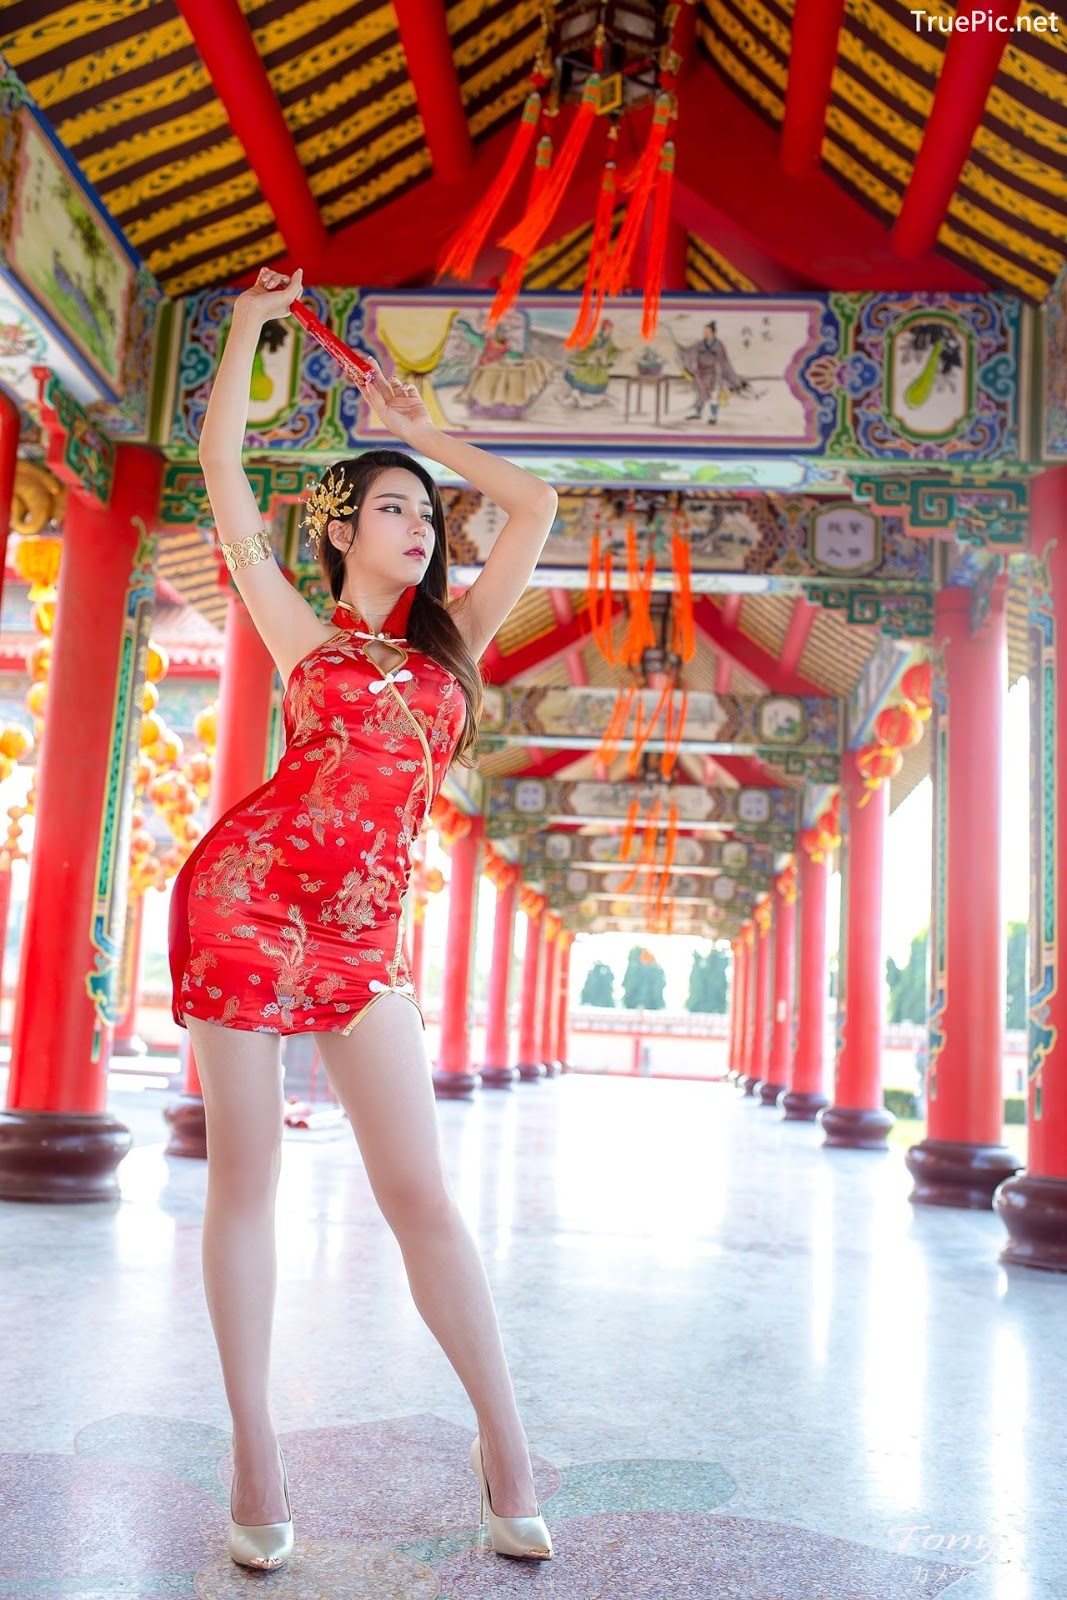 Image-Thailand-Hot-Model-Janet-Kanokwan-Saesim-Sexy-Chinese-Girl-Red-Dress-Traditional-TruePic.net- Picture-16